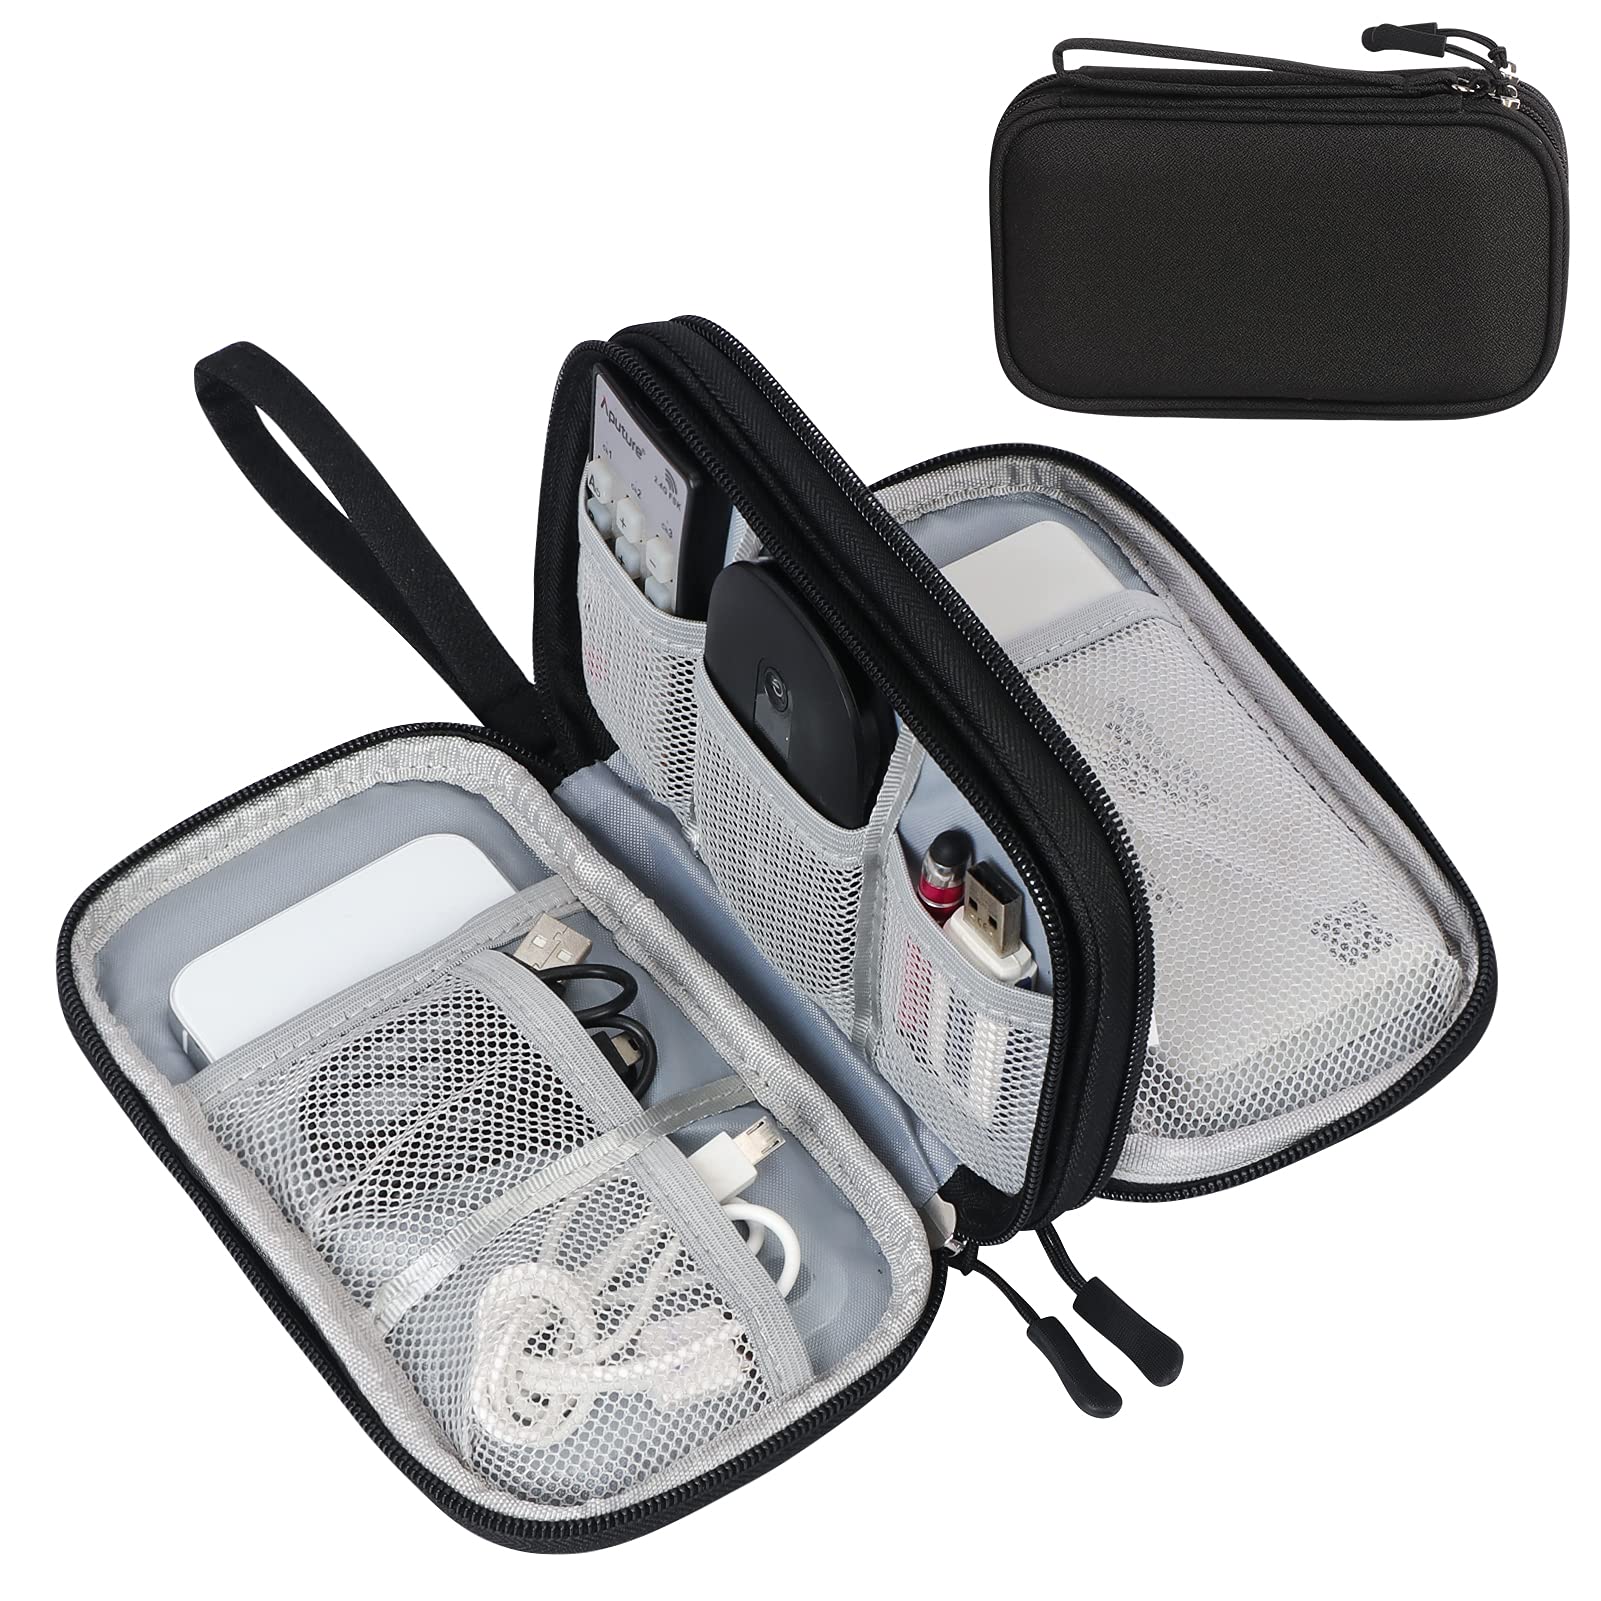 FYY Electronic Organizer Set, Small Cable Case for Daily Use and Travel, Middle Bag for Organisation at Home and Office